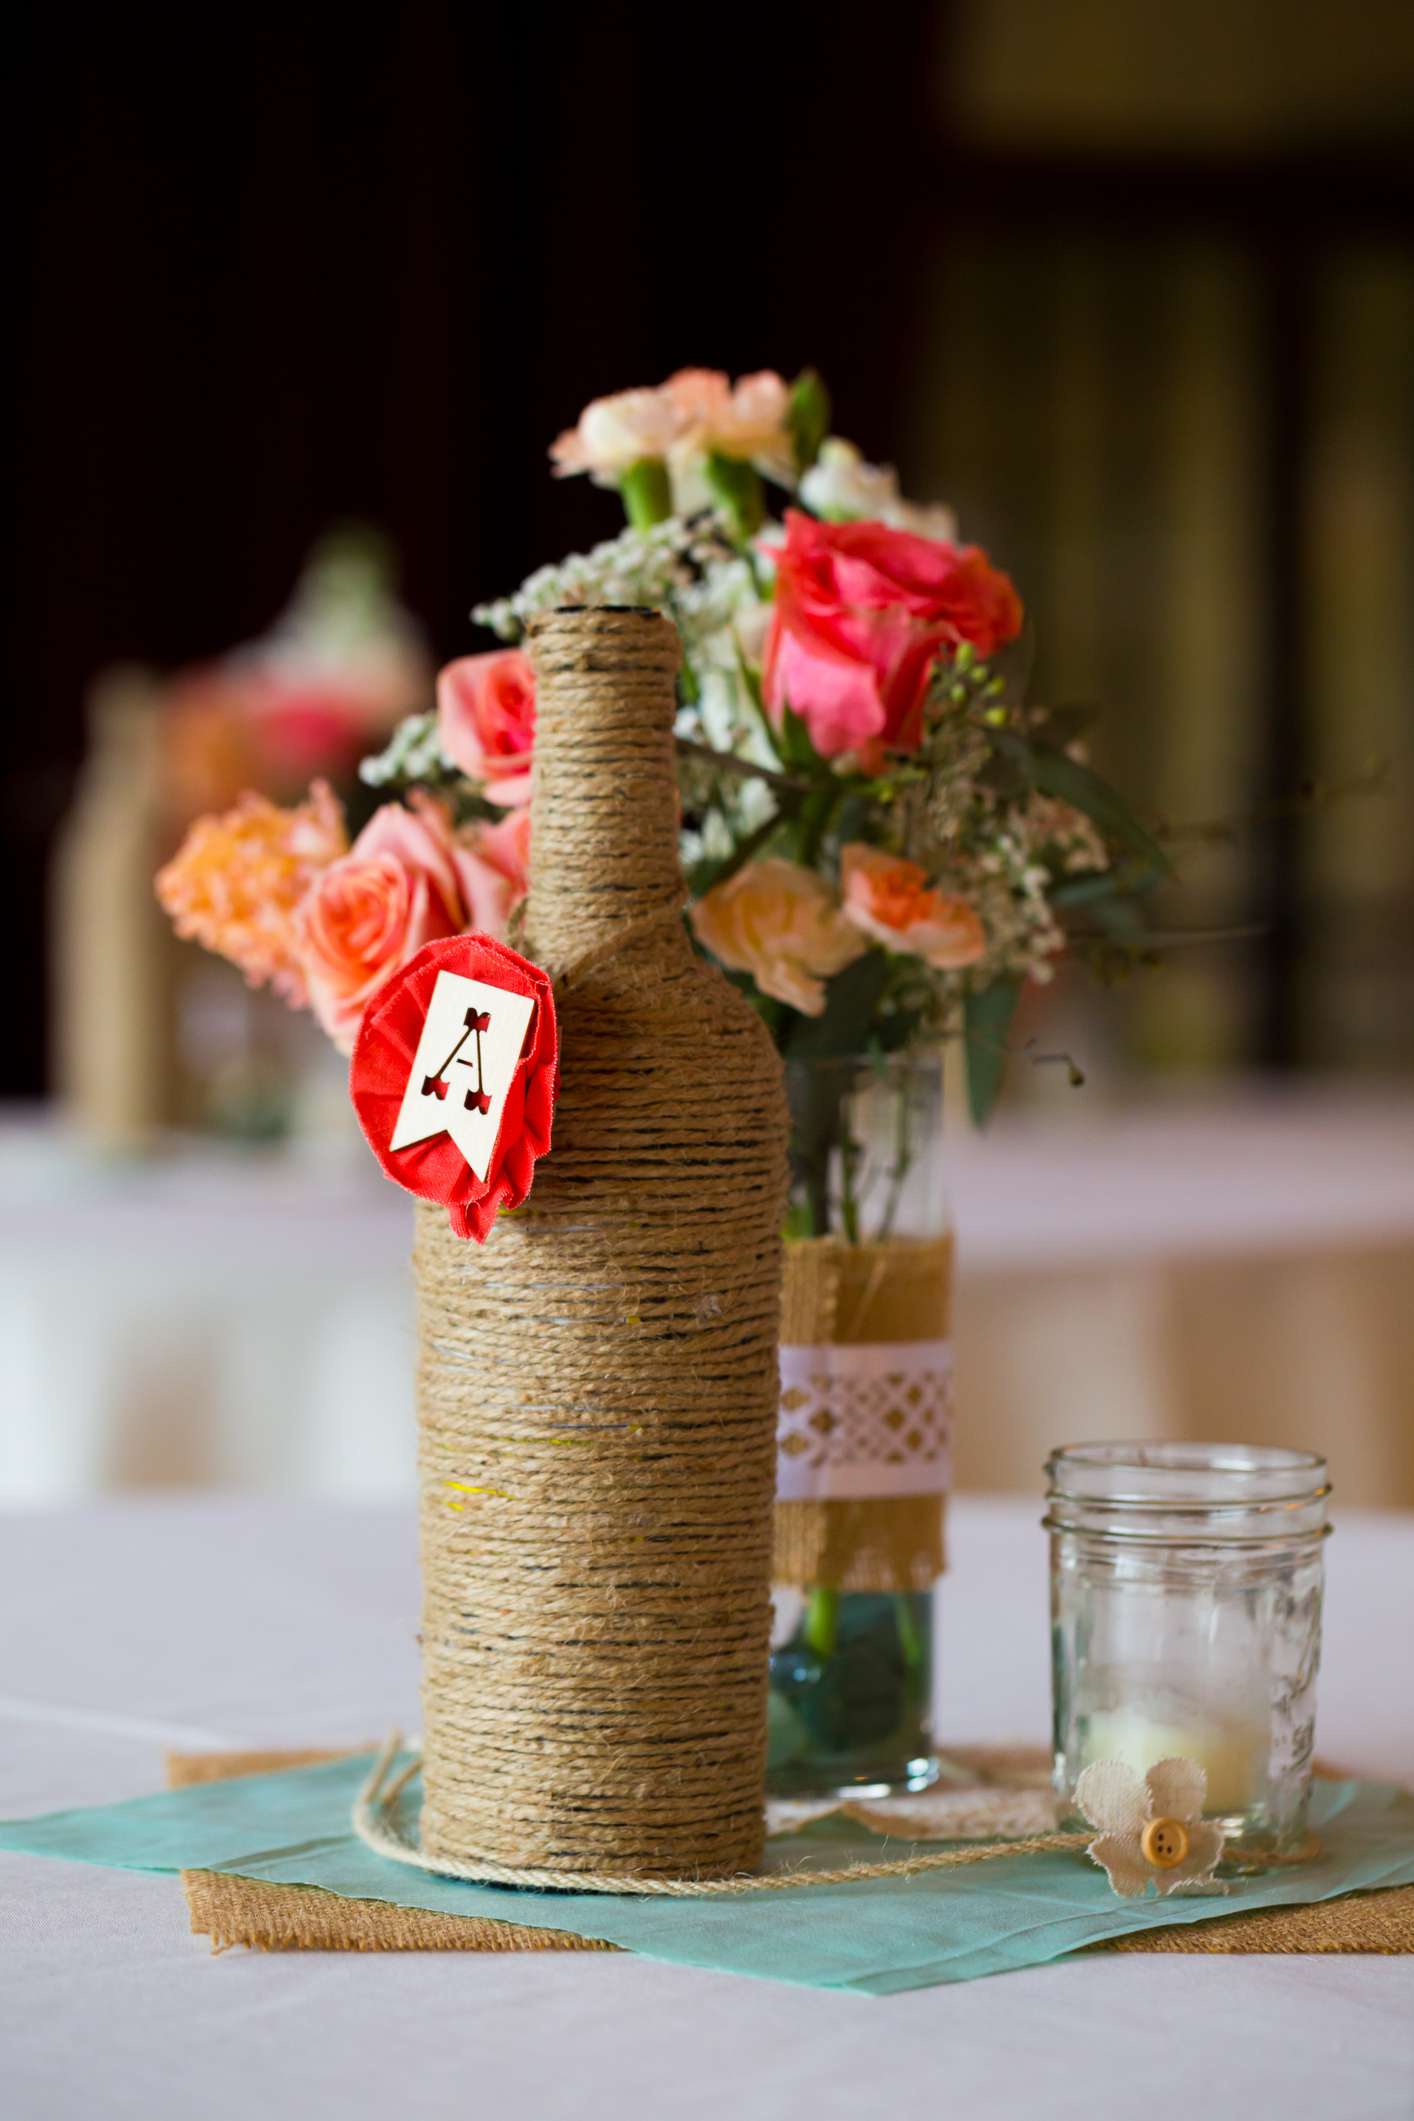 Twine wrapped bottle as part of a table centerpiece